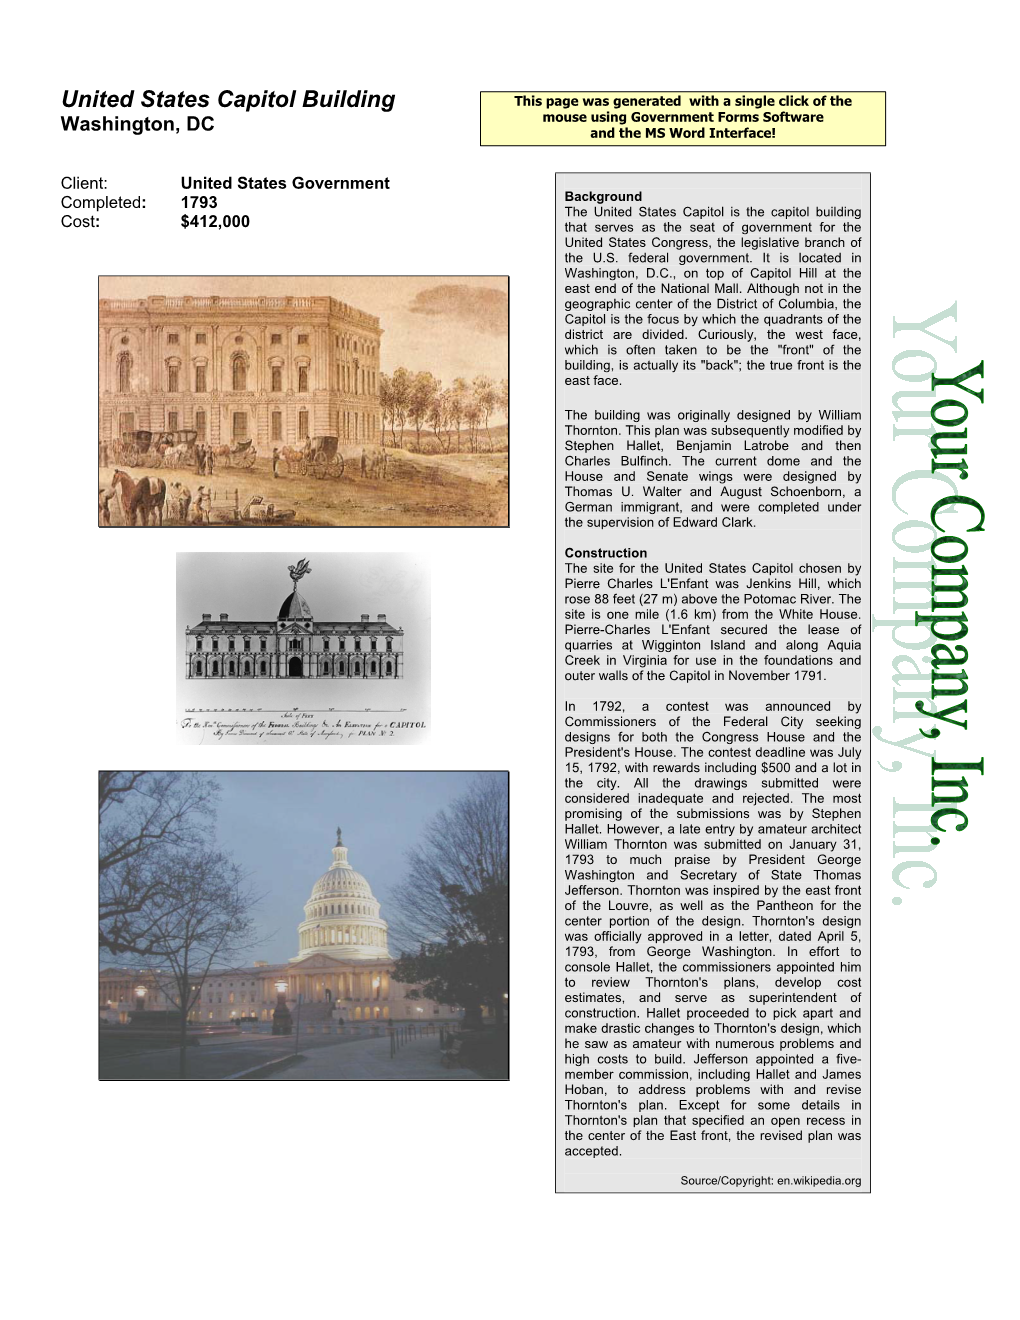 United States Capitol Building This Page Was Generated with a Single Click of the Mouse Using Government Forms Software Washington, DC and the MS Word Interface!